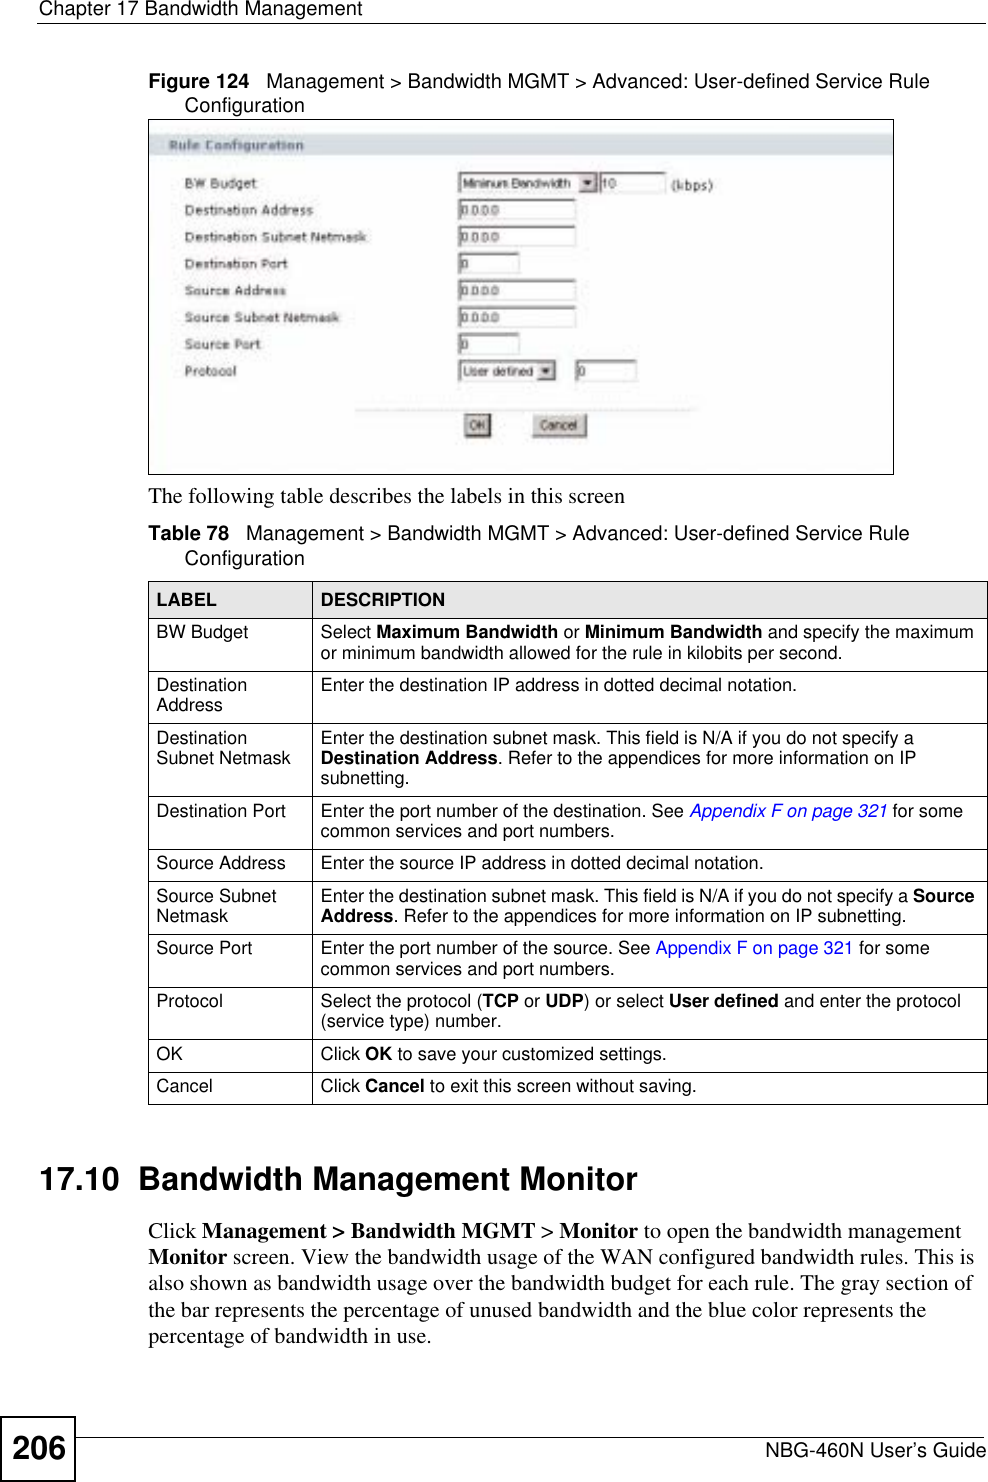 Chapter 17 Bandwidth ManagementNBG-460N User’s Guide206Figure 124   Management &gt; Bandwidth MGMT &gt; Advanced: User-defined Service Rule Configuration The following table describes the labels in this screenTable 78   Management &gt; Bandwidth MGMT &gt; Advanced: User-defined Service Rule Configuration  17.10  Bandwidth Management MonitorClick Management &gt; Bandwidth MGMT &gt; Monitor to open the bandwidth management Monitor screen. View the bandwidth usage of the WAN configured bandwidth rules. This is also shown as bandwidth usage over the bandwidth budget for each rule. The gray section of the bar represents the percentage of unused bandwidth and the blue color represents the percentage of bandwidth in use.LABEL DESCRIPTIONBW Budget Select Maximum Bandwidth or Minimum Bandwidth and specify the maximum or minimum bandwidth allowed for the rule in kilobits per second. Destination Address Enter the destination IP address in dotted decimal notation.Destination Subnet Netmask Enter the destination subnet mask. This field is N/A if you do not specify a Destination Address. Refer to the appendices for more information on IP subnetting.Destination Port Enter the port number of the destination. See Appendix F on page 321 for some common services and port numbers.Source Address Enter the source IP address in dotted decimal notation.Source Subnet Netmask Enter the destination subnet mask. This field is N/A if you do not specify a Source Address. Refer to the appendices for more information on IP subnetting.Source Port Enter the port number of the source. See Appendix F on page 321 for some common services and port numbers.Protocol Select the protocol (TCP or UDP) or select User defined and enter the protocol (service type) number. OK Click OK to save your customized settings.Cancel Click Cancel to exit this screen without saving.